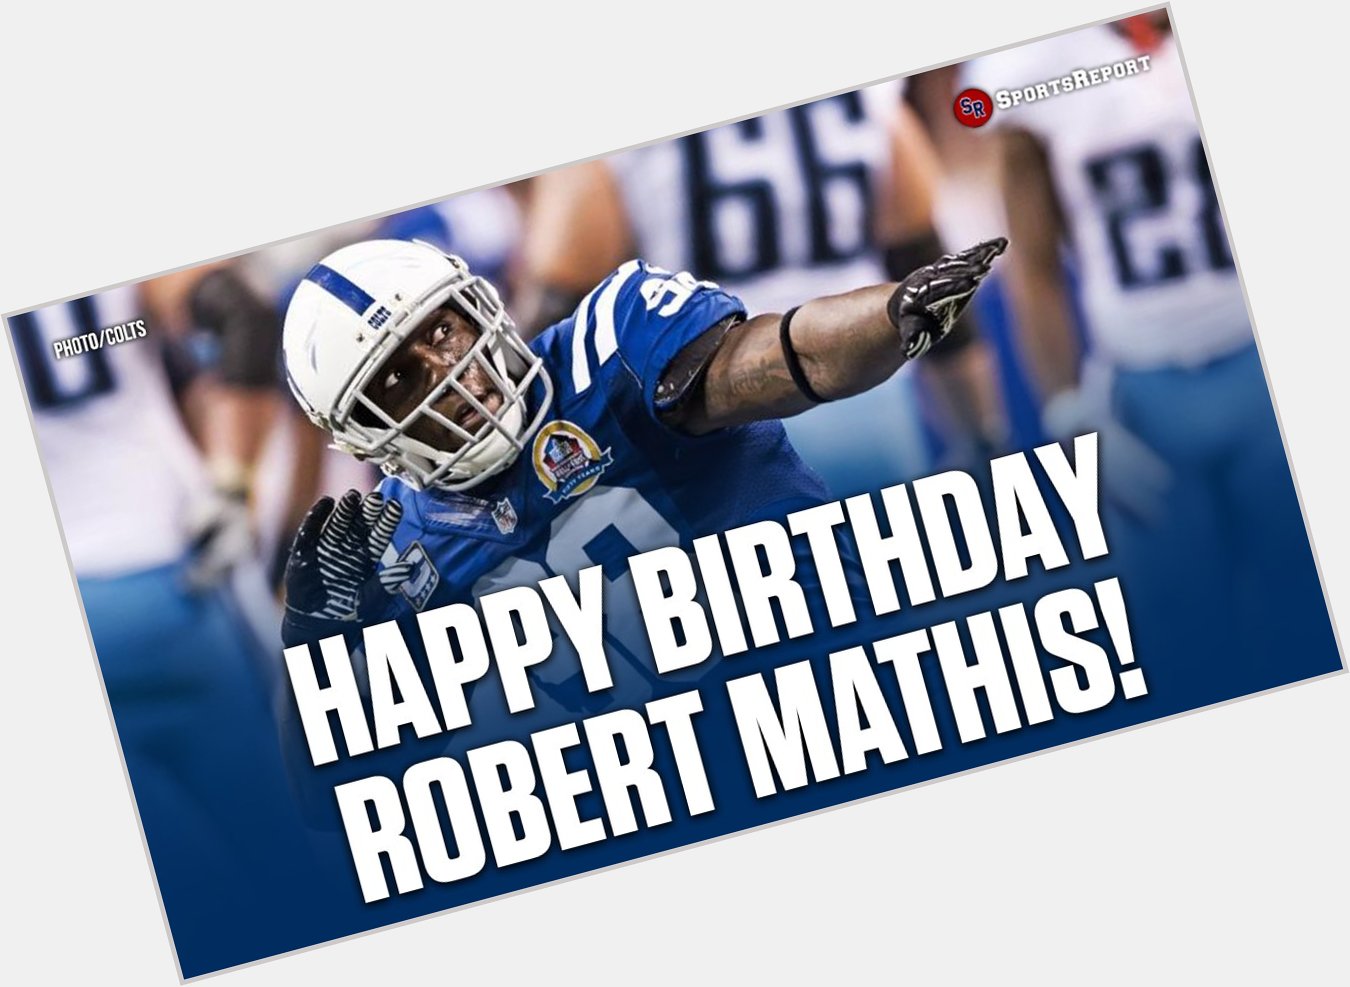 Colts Fans, let\s wish Legend Robert Mathis a Happy Birthday! 